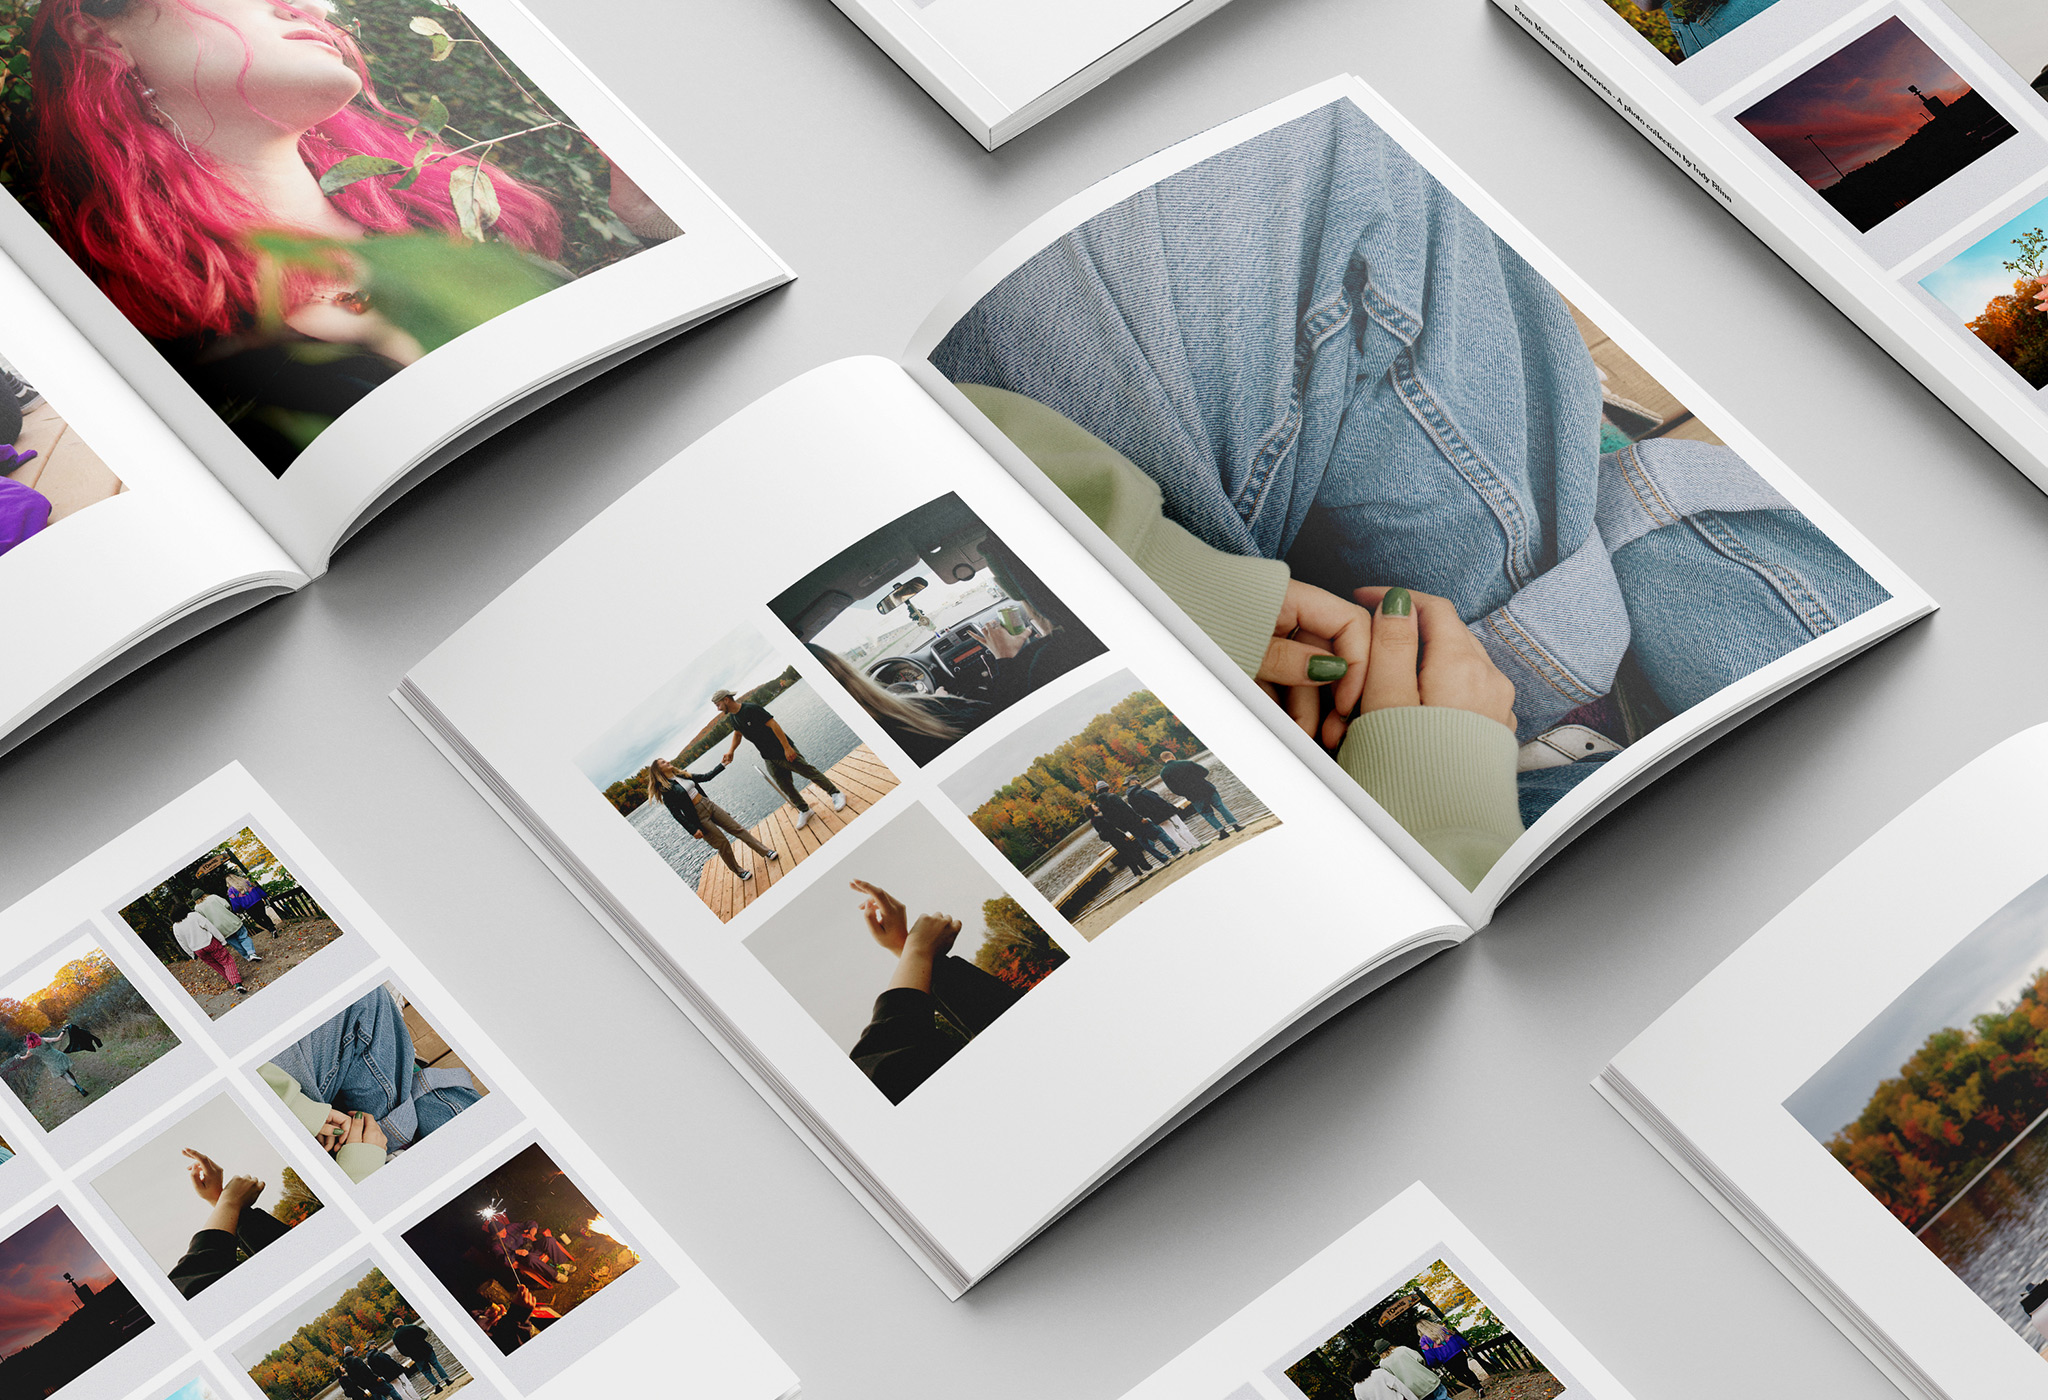 Mockup of the photobook I created in 2023. The image displays multiple spreads of the book.